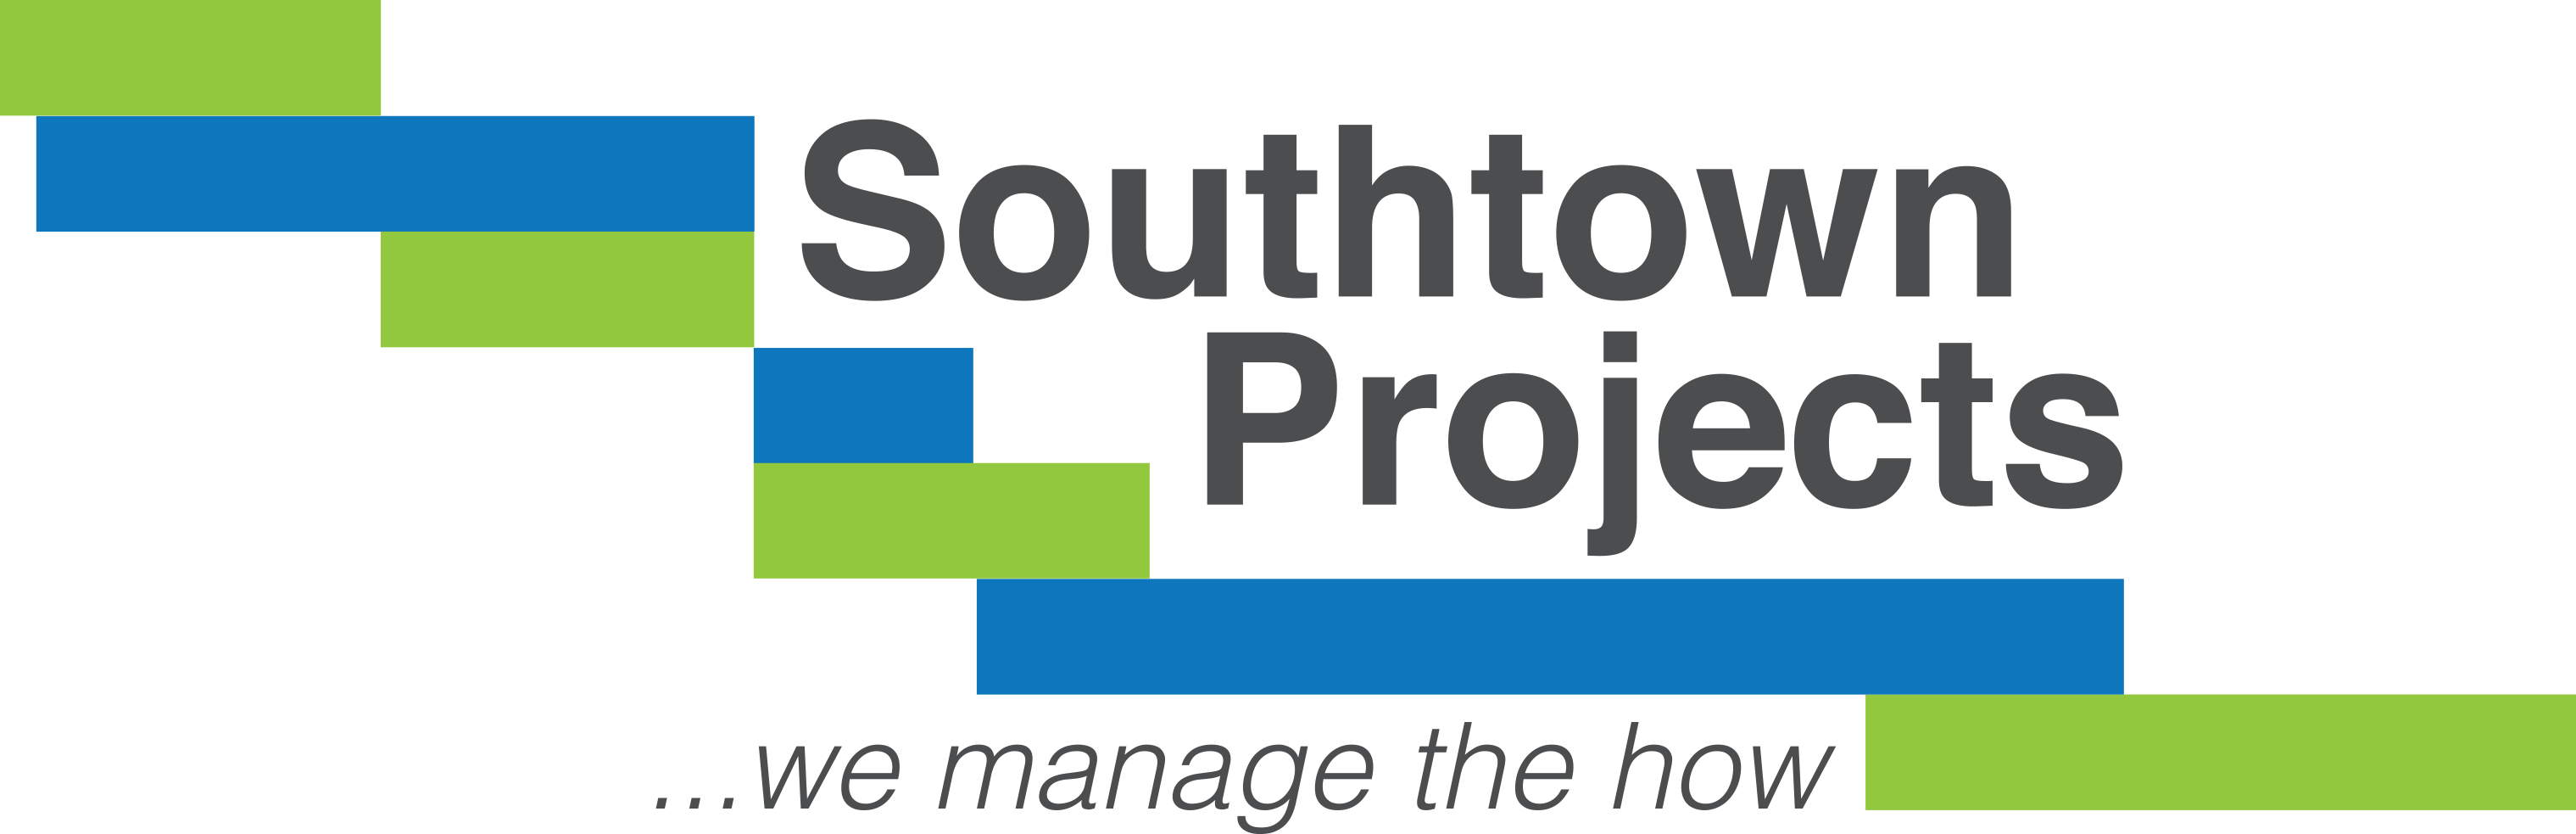 Southtown Projects